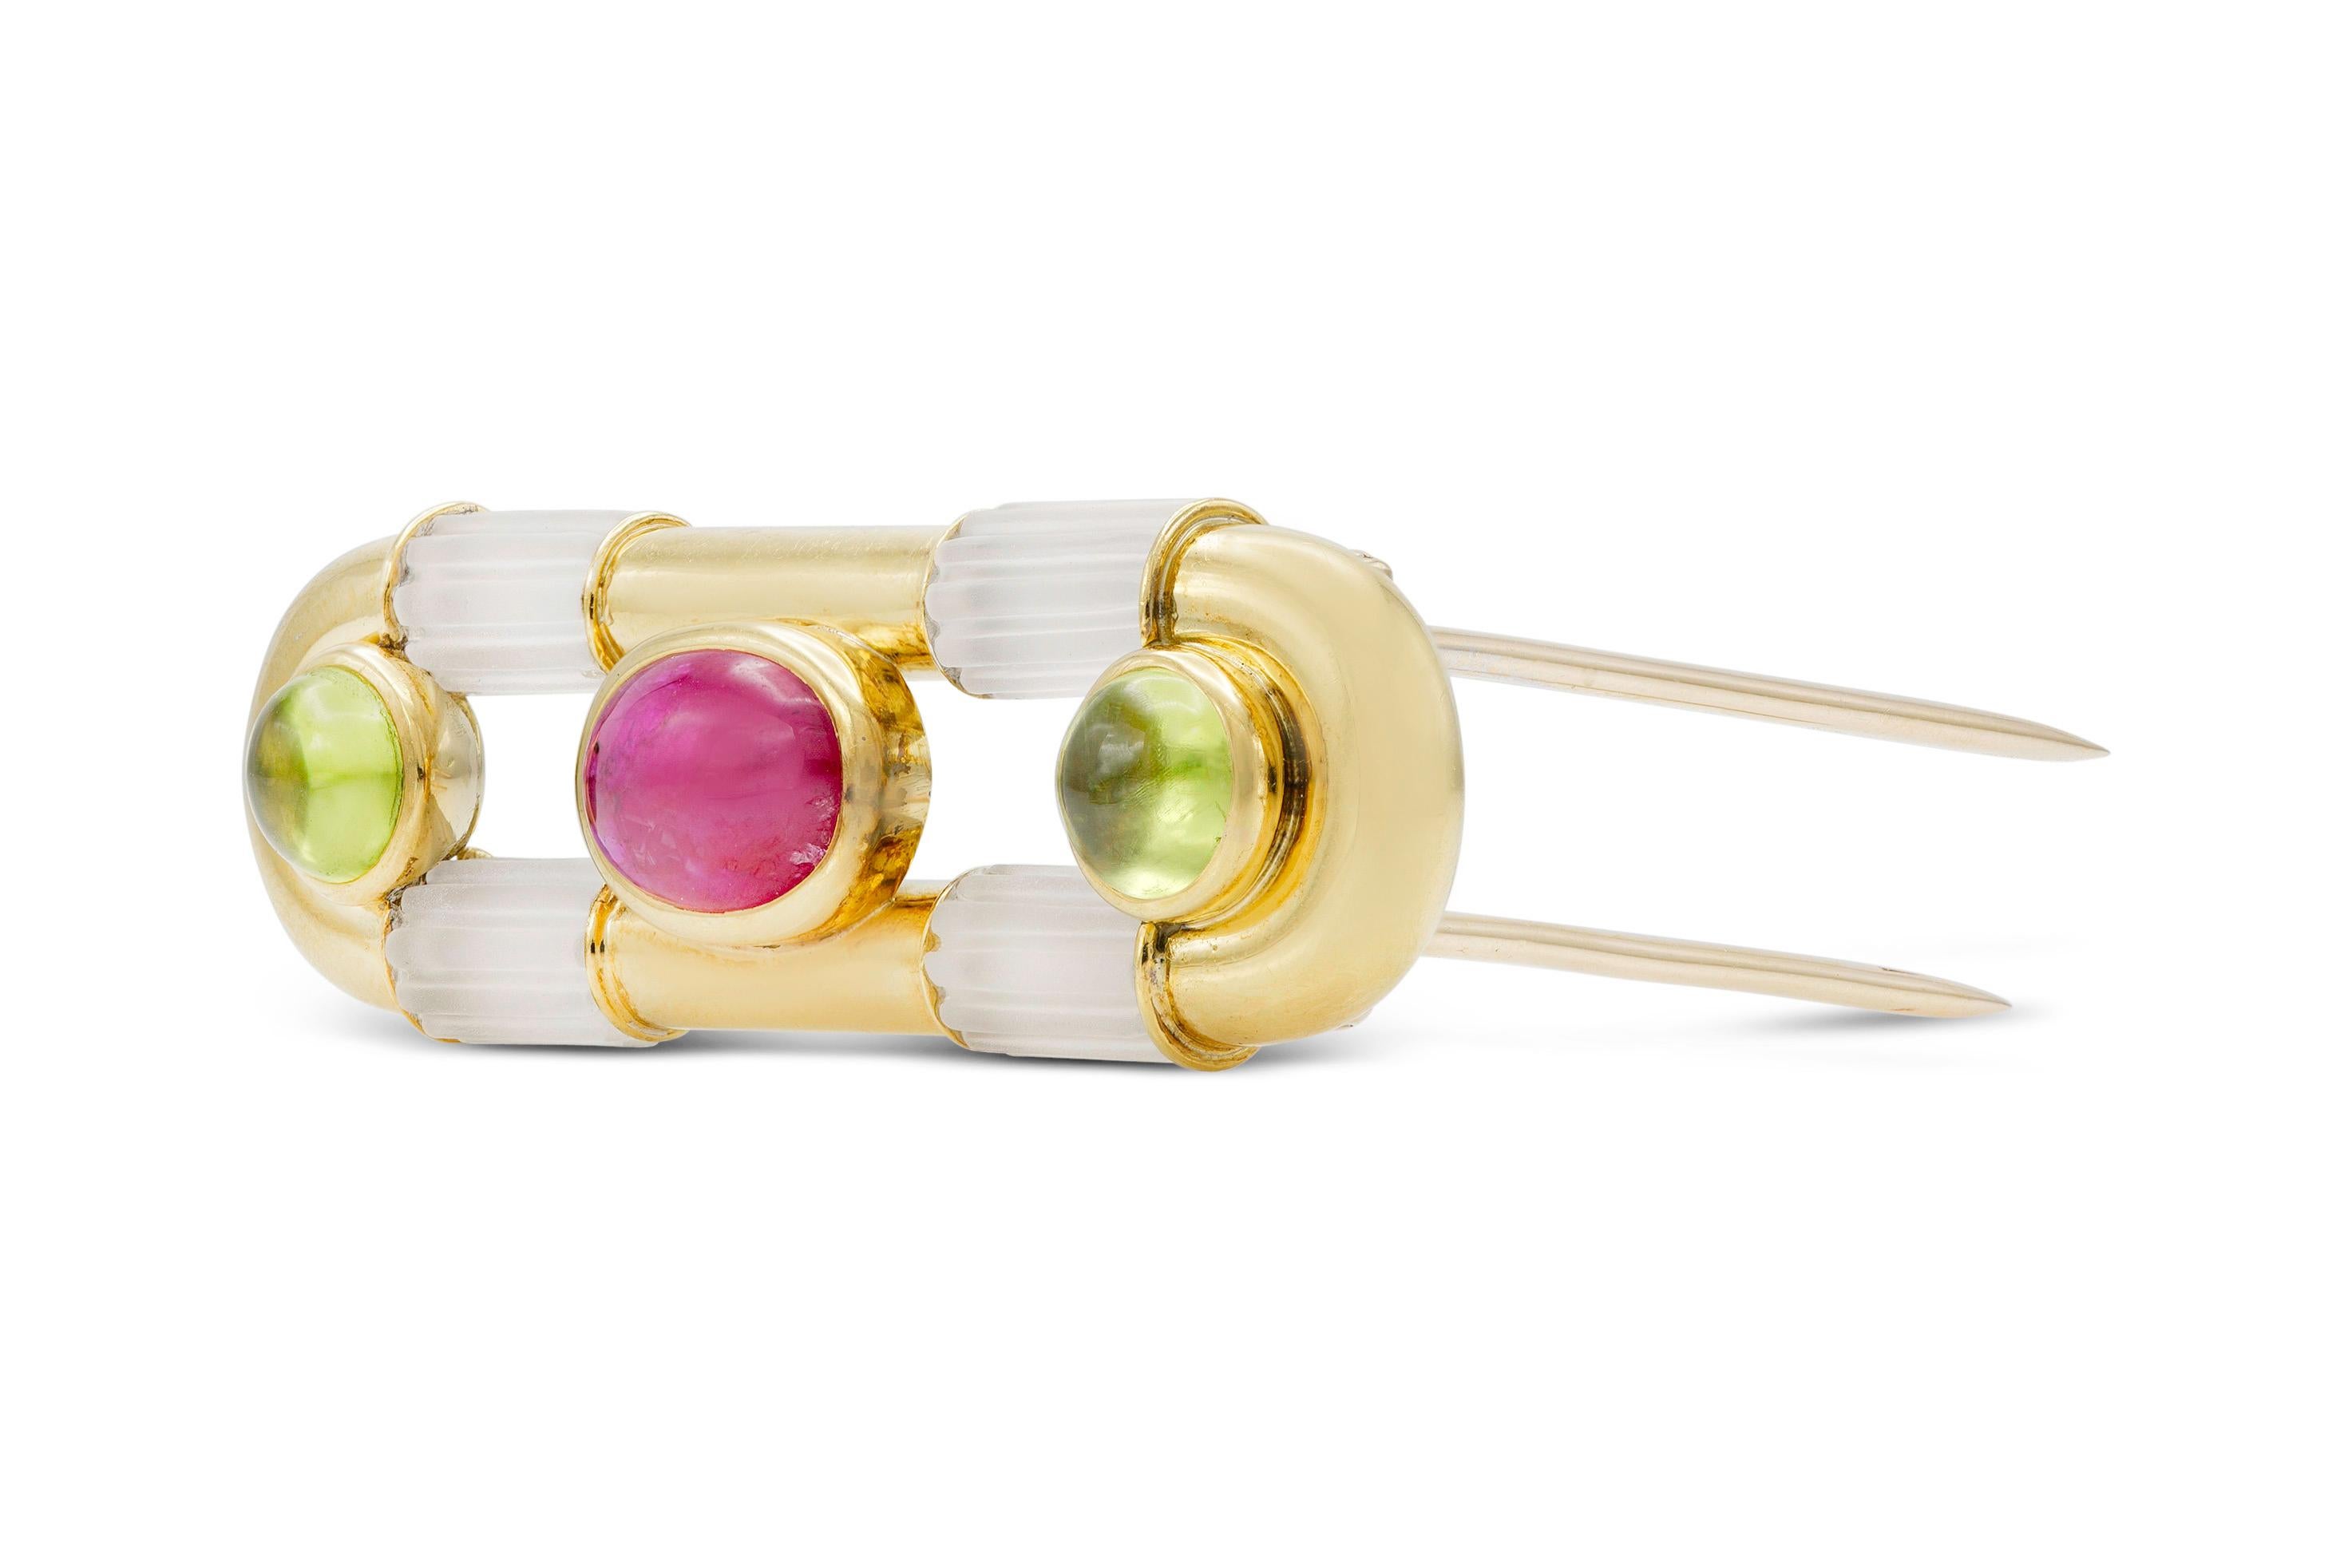 Finely crafted in 18k yellow gold with a cabochon Ruby, two cabochon Tourmalines, and crystals.
Signed by Bvlgari